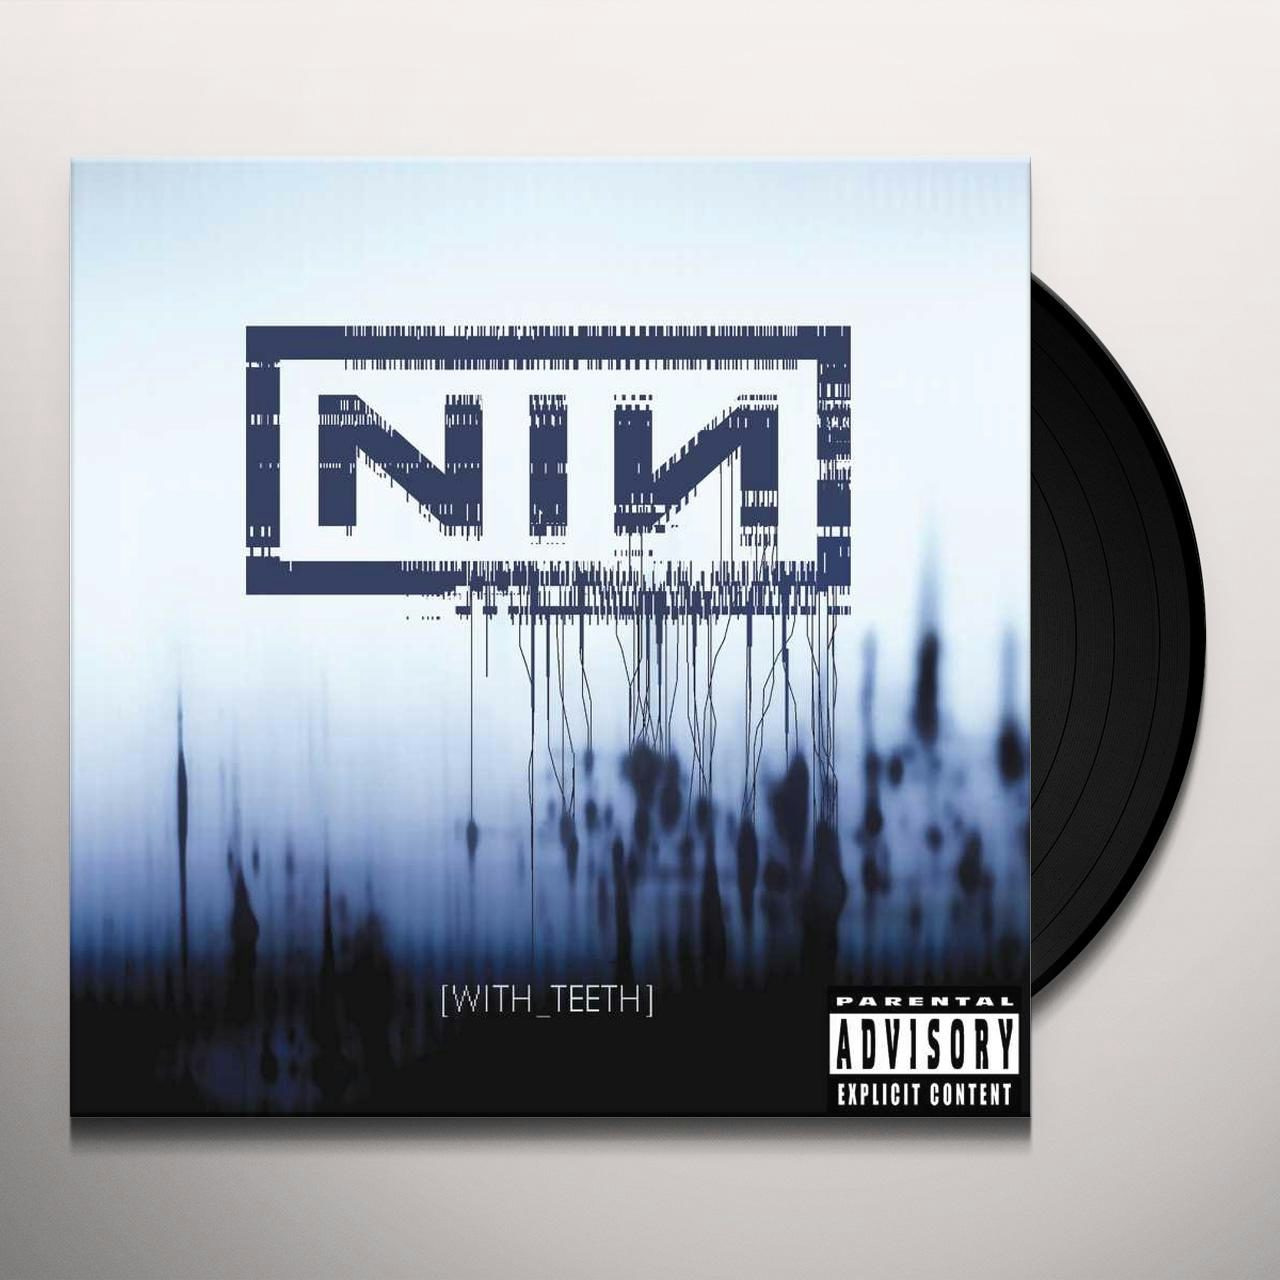 Nine Inch Nails 2005/09 With Teeth Japan album promo ad – Japan Rock Archive